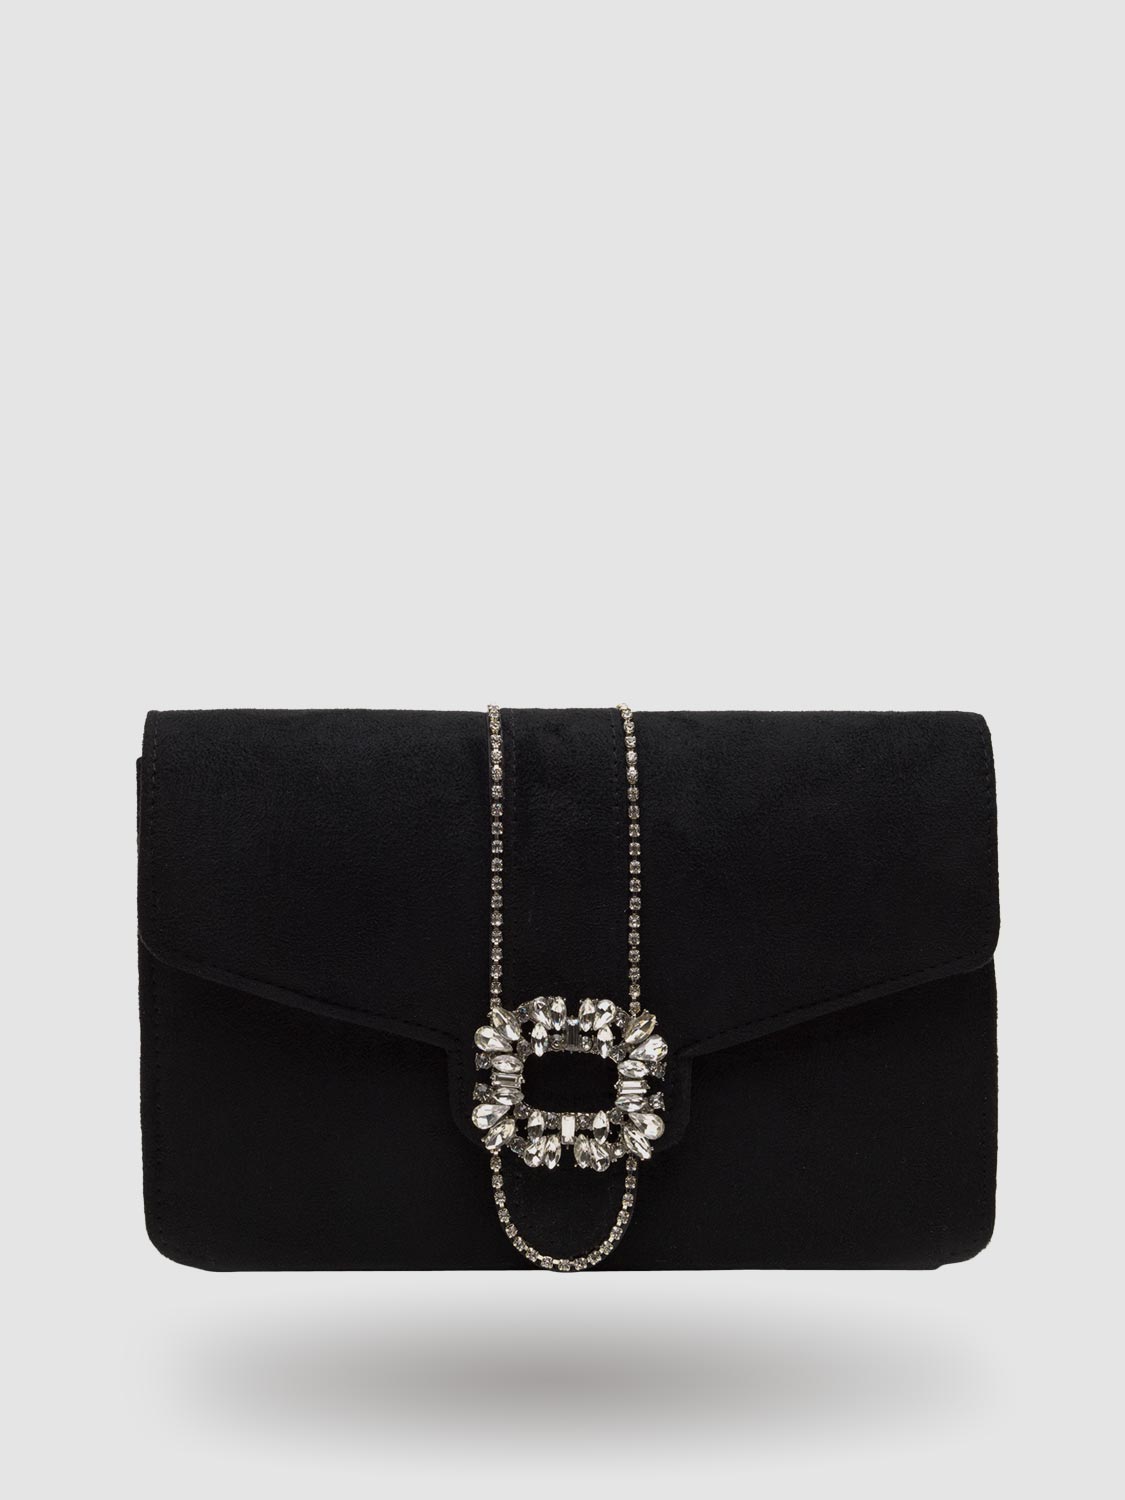 Suede Flapover Envelope Clutch With Jewelled Trim